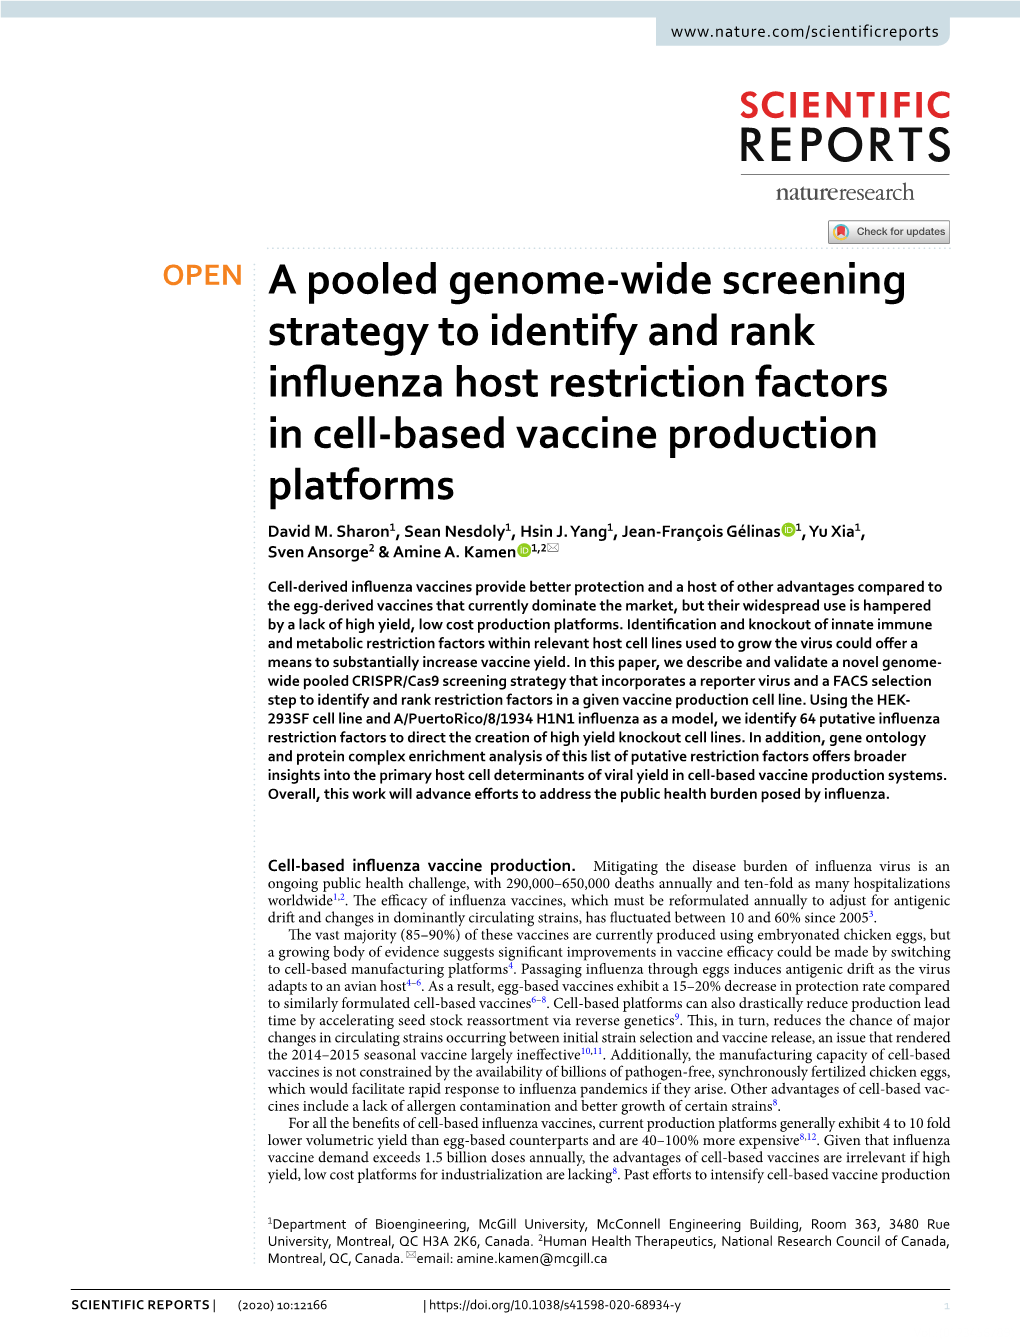 A Pooled Genome-Wide Screening Strategy to Identify and Rank